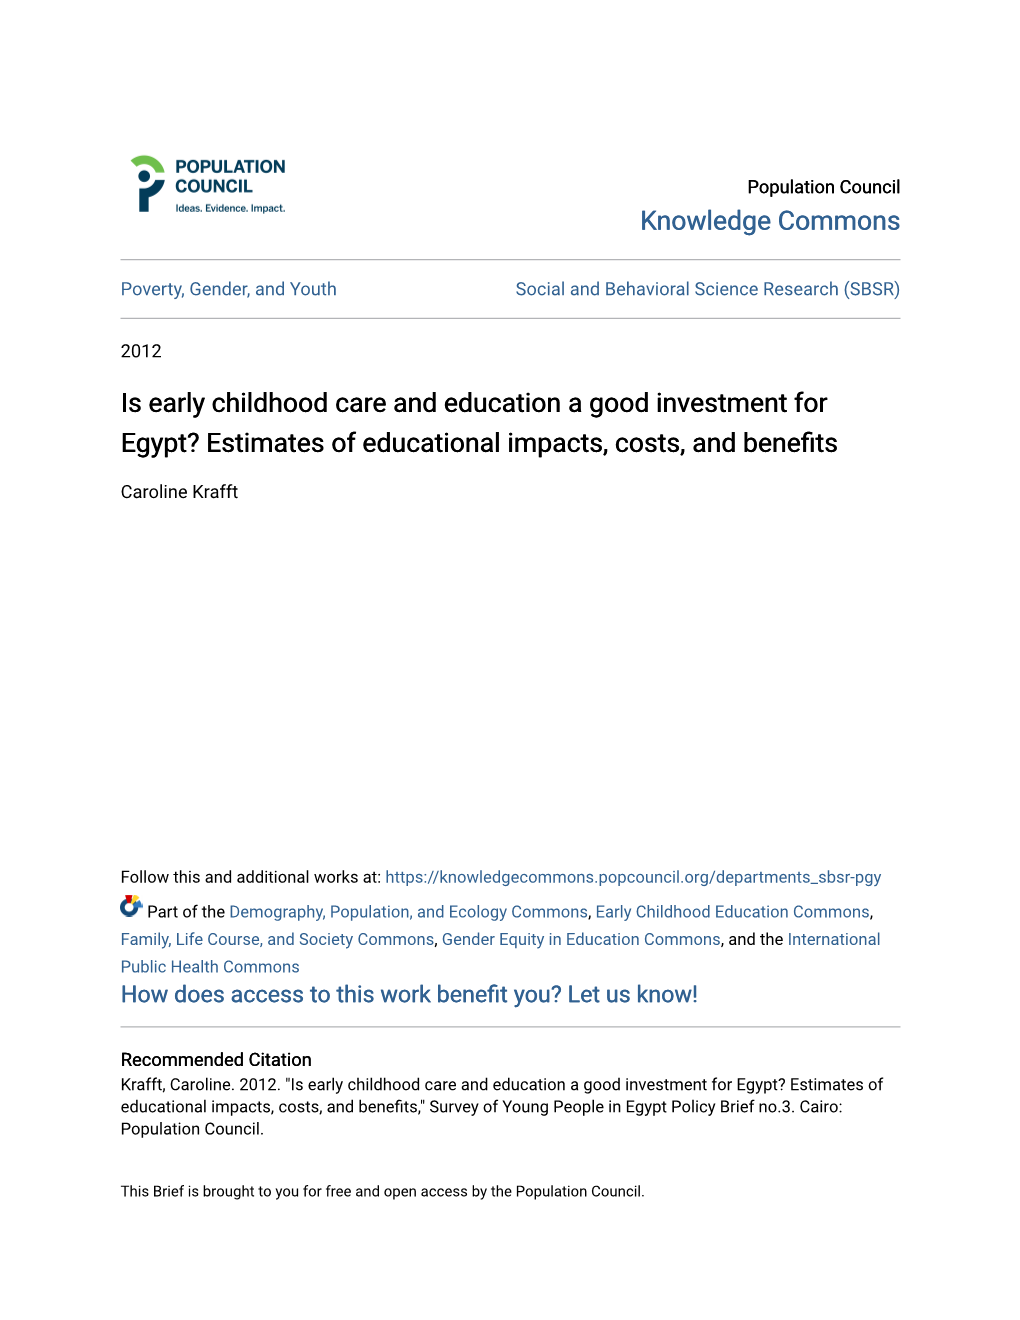 Is Early Childhood Care and Education a Good Investment for Egypt? Estimates of Educational Impacts, Costs, and Benefits